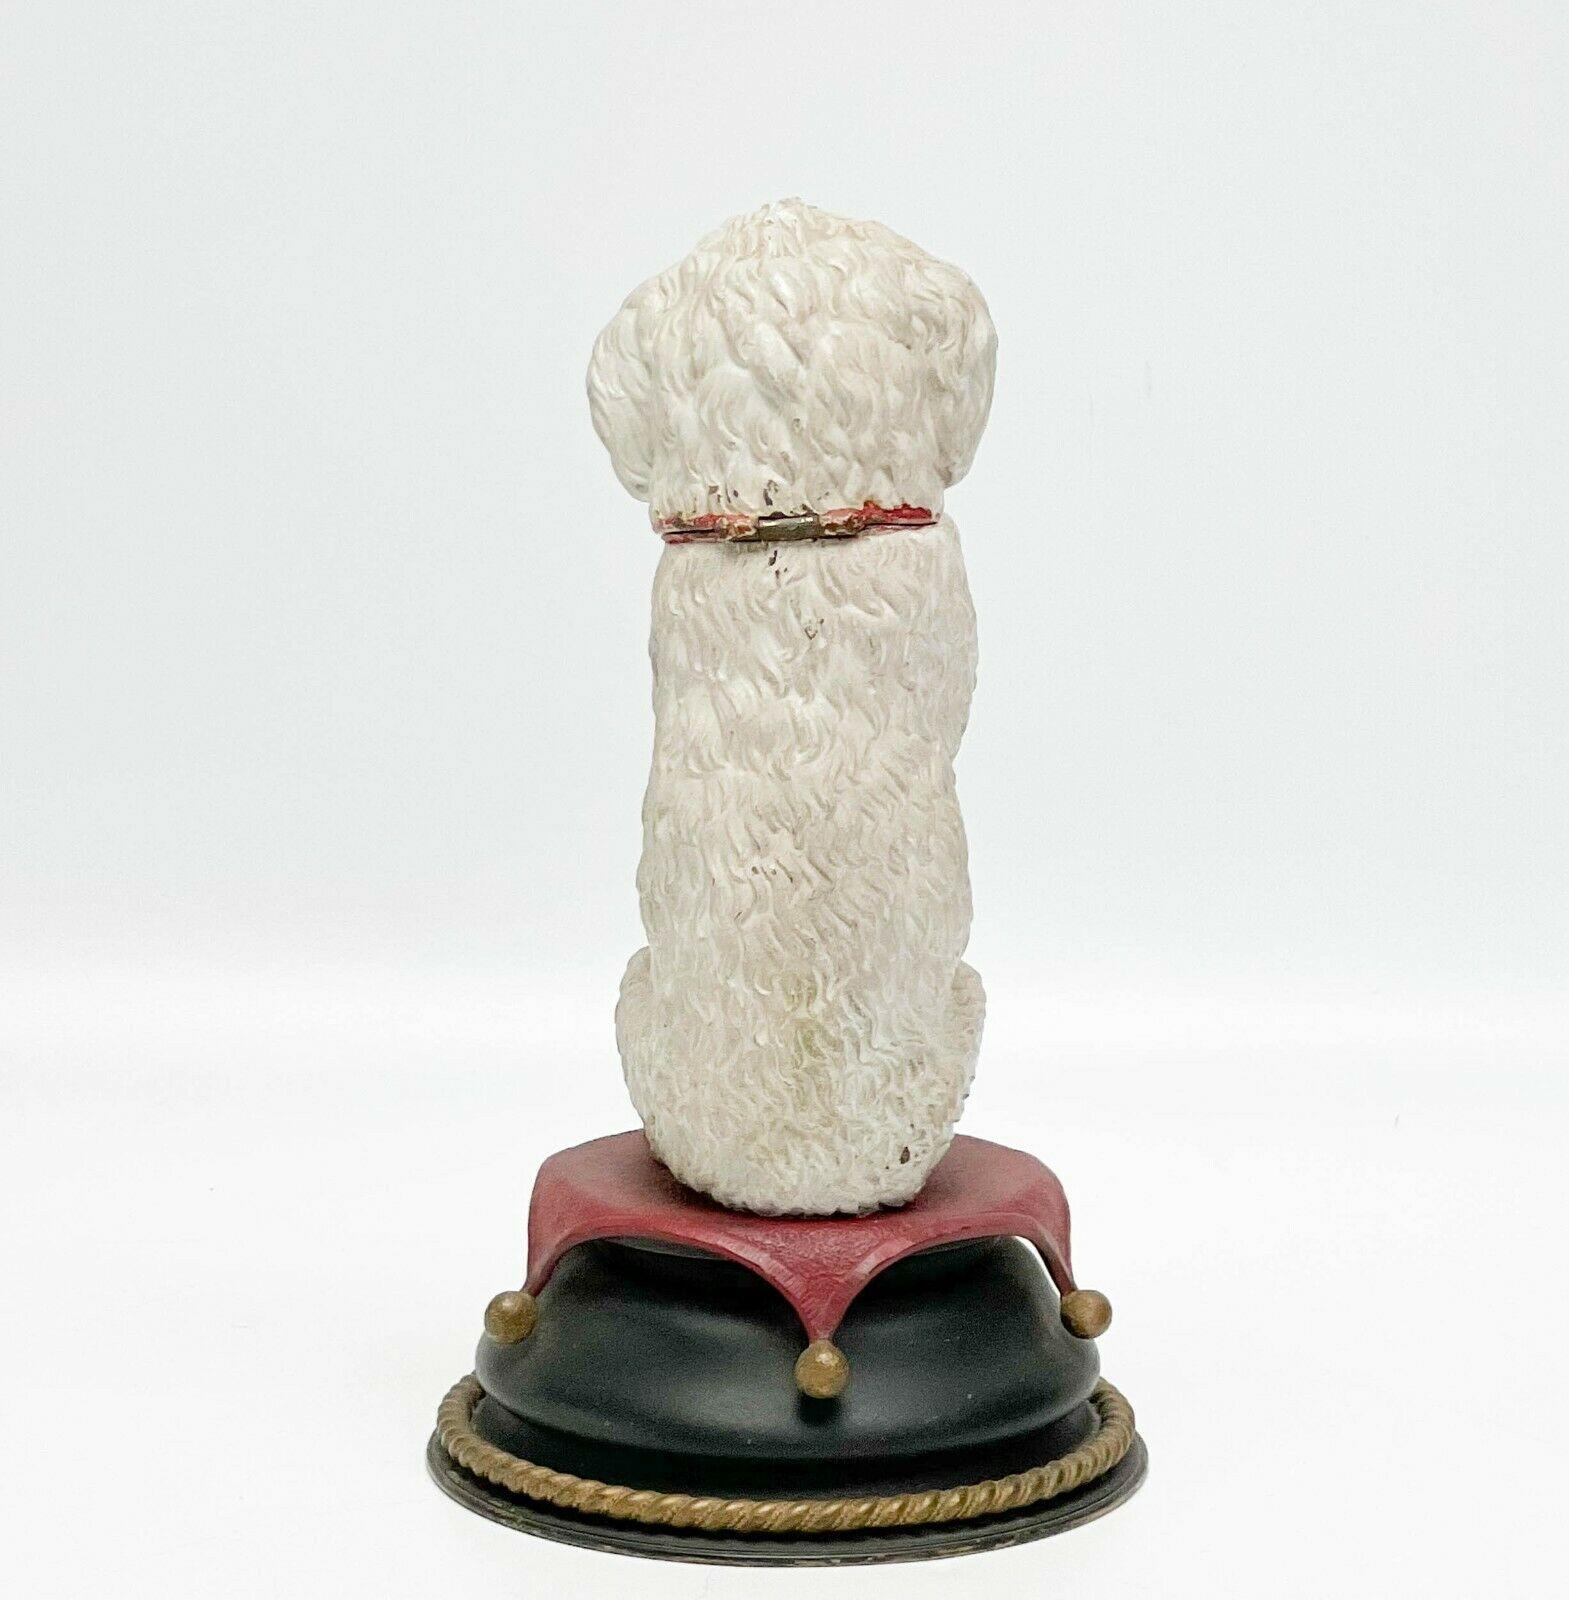 Austrian Novelty cold painted bronze inkwell modelled as a white dog, circa 1910

A white dog with a hinged neck that opens to reveal inkwell with removable glass liner. On a circular base.

Additional information:
Dimension: 5.5 inches